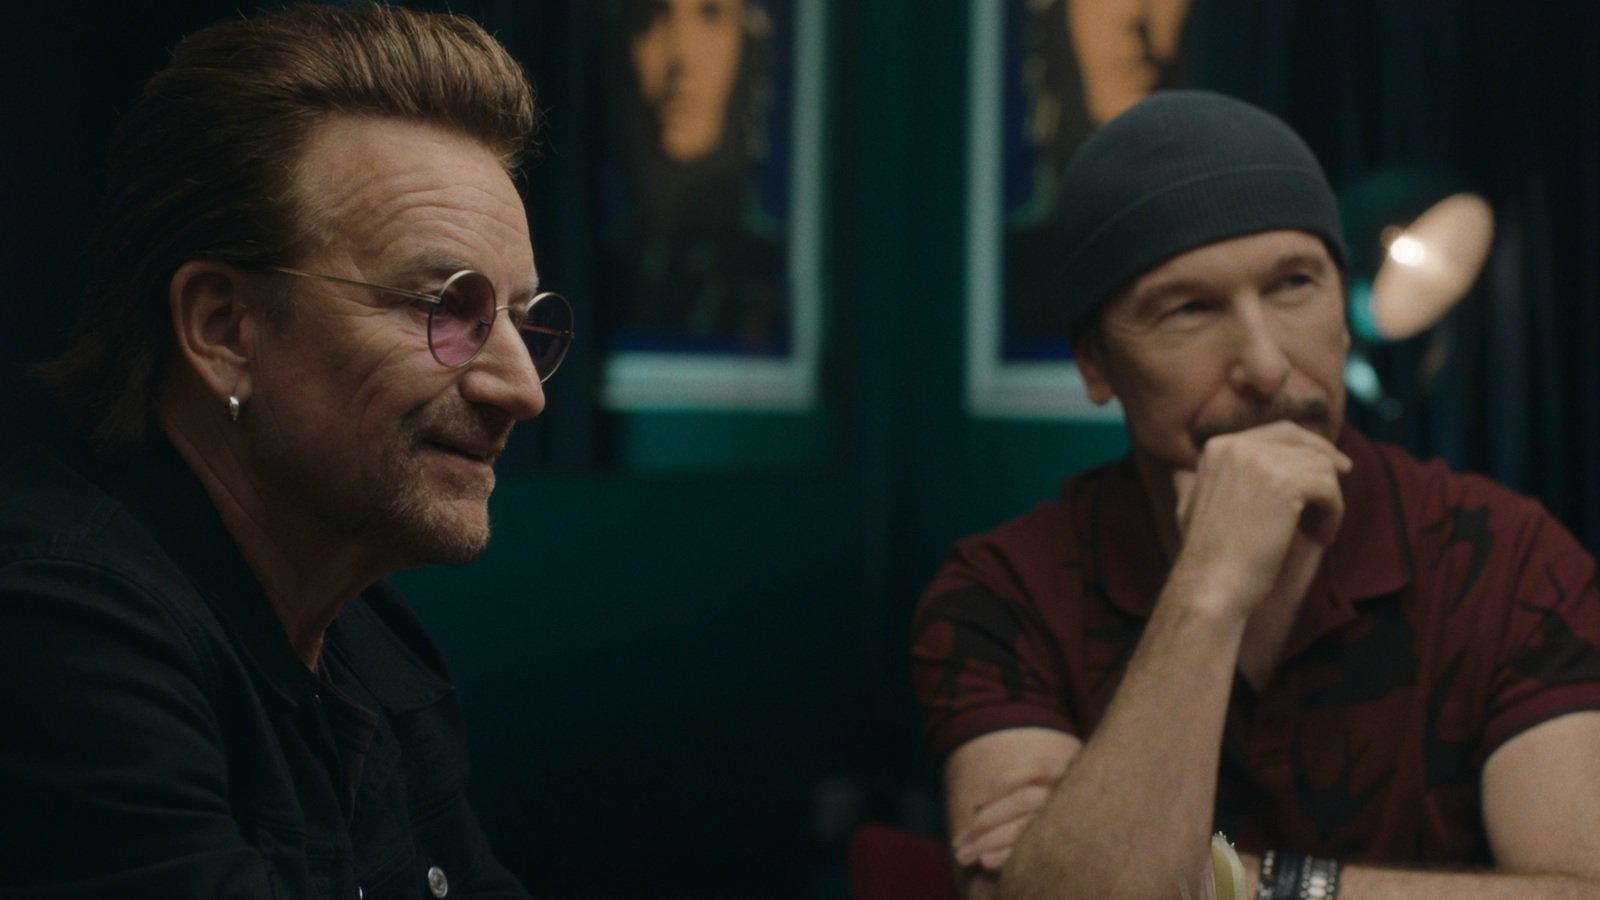 U2's Frontman The Edge Interview About 'Songs of Surrender' Album